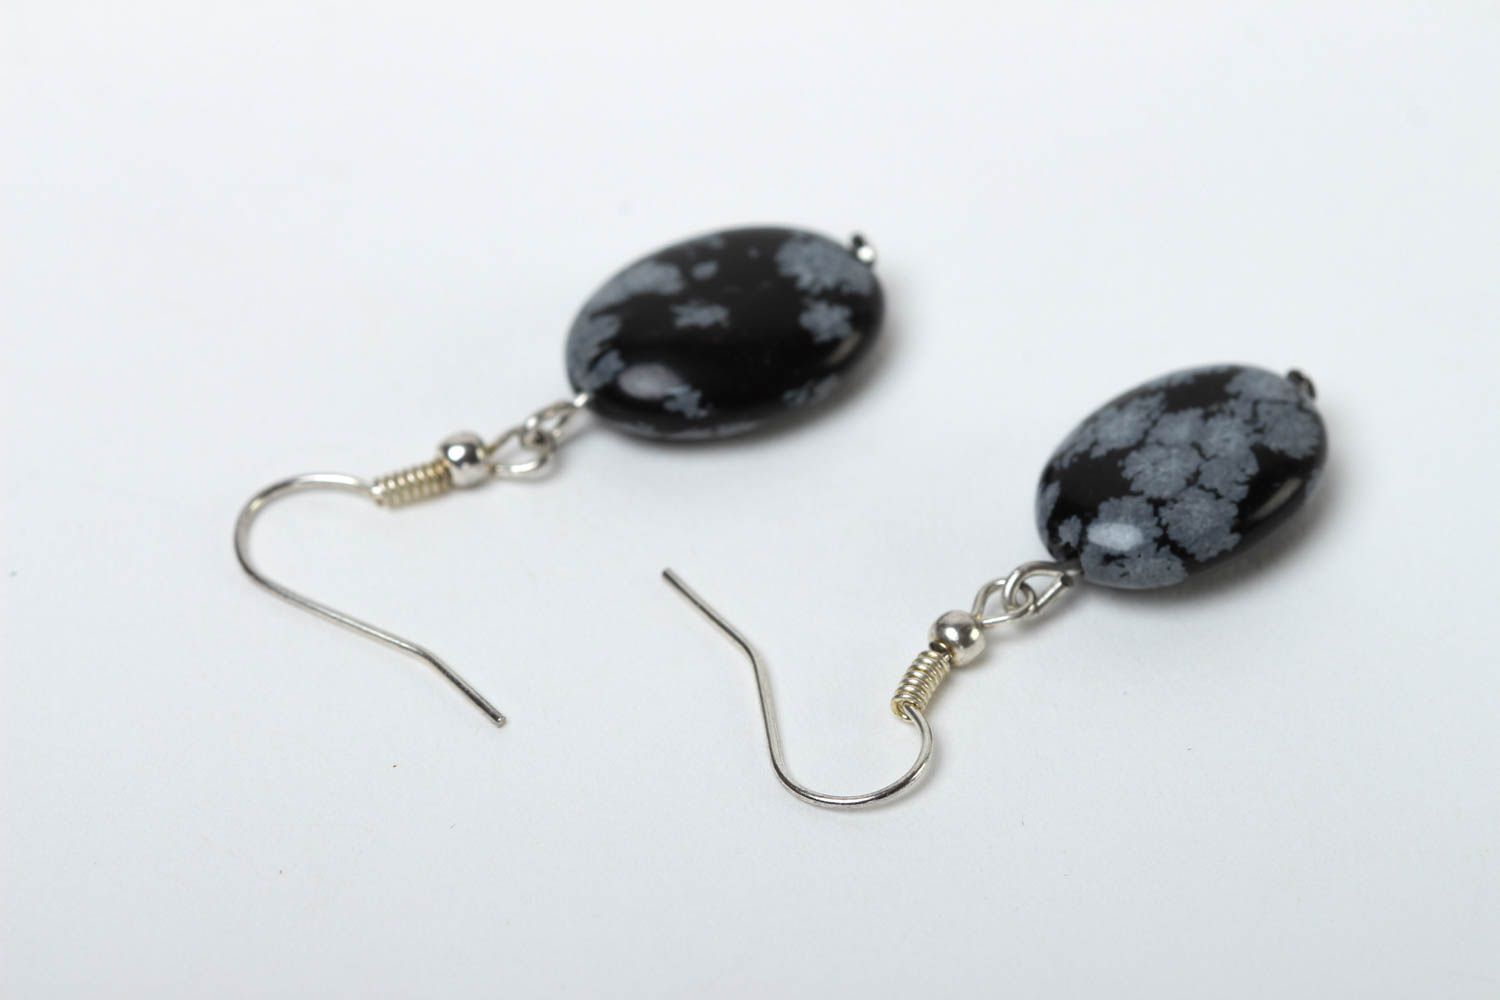 Handmade earrings with natural stones earrings with charms fashion jewelry photo 4